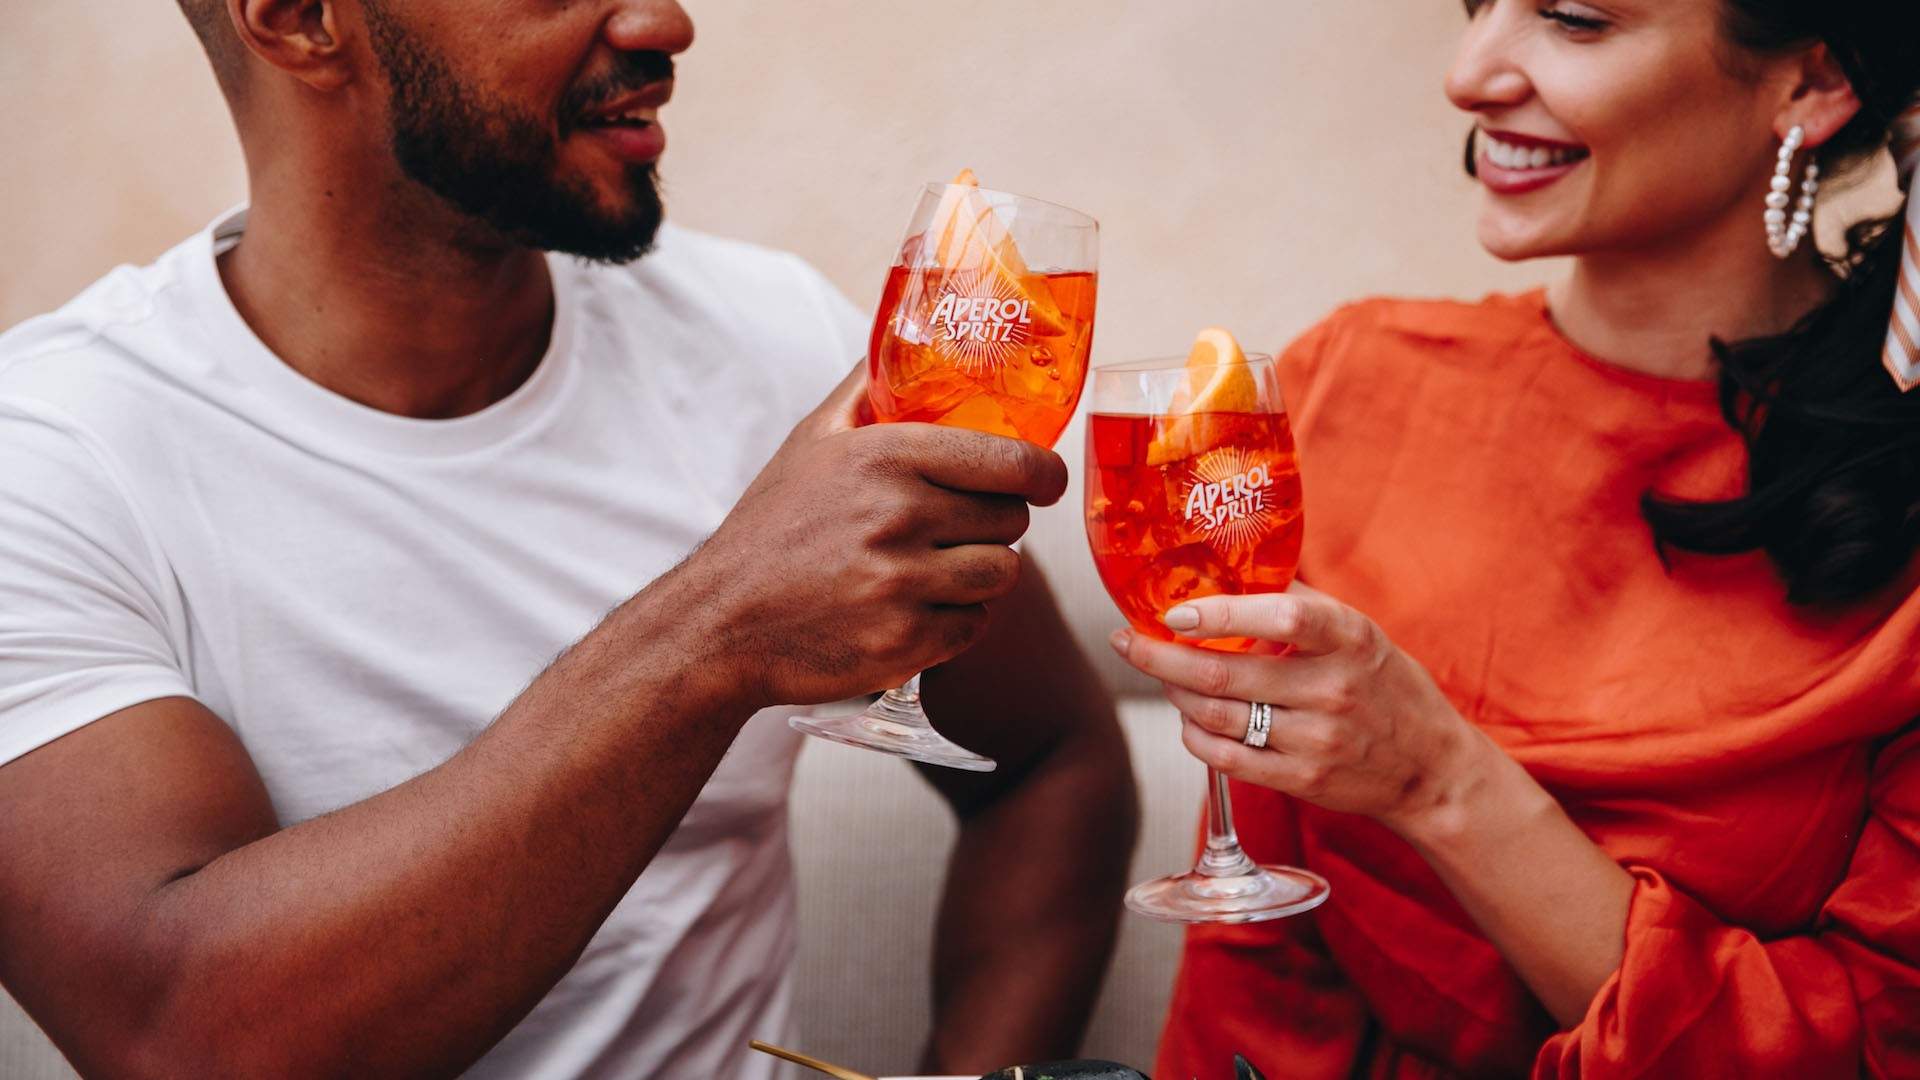 Aperol Has Launched a Series of Free Cooking and Art Classes to Help Up Your Aperitivo Game